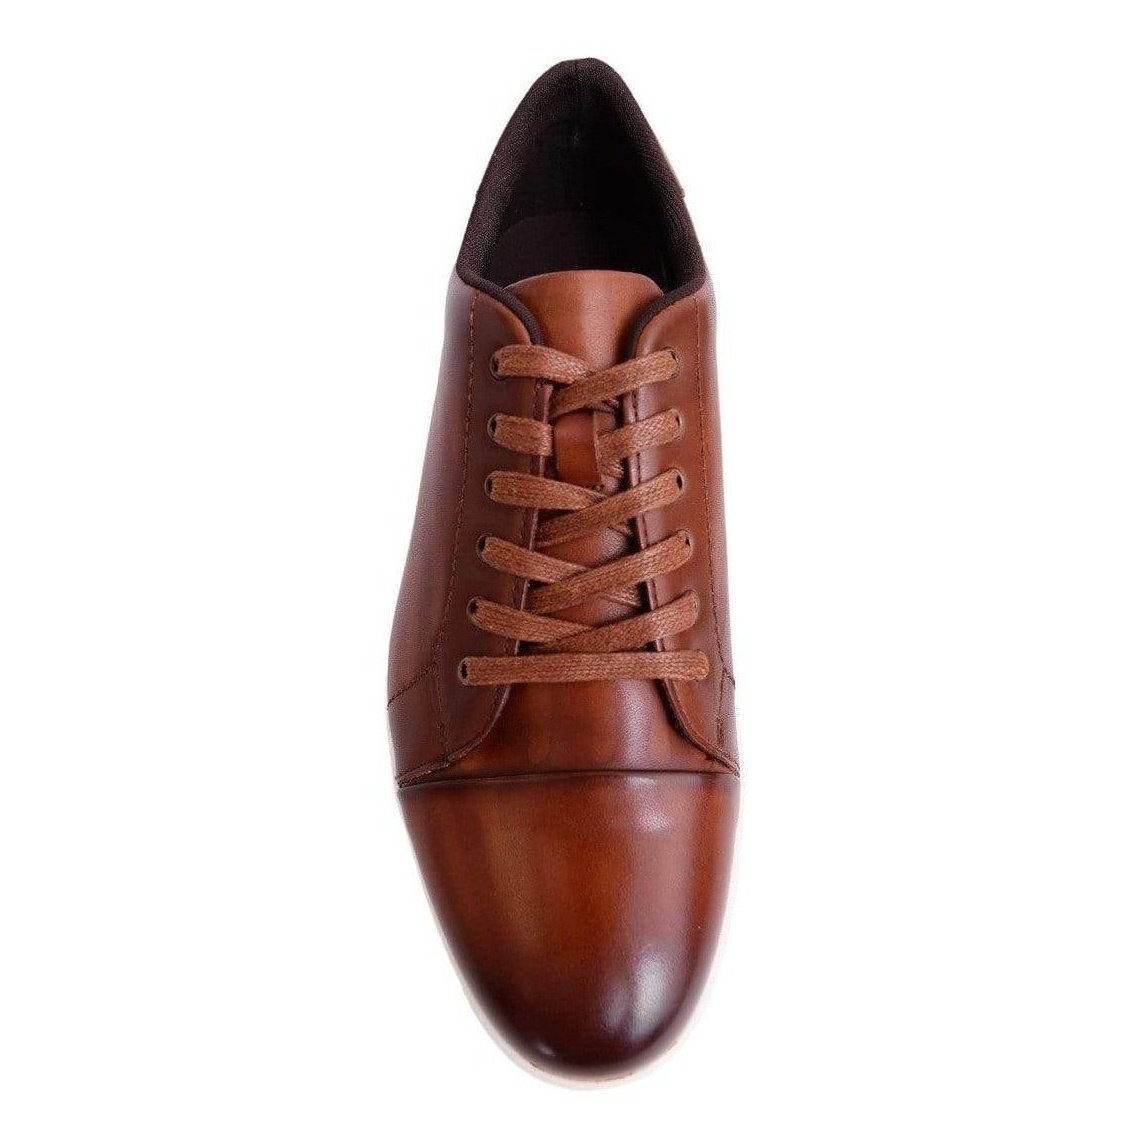 Stacy Adams SHOES Mens Stacy Adams Cognac Brown Leather Lace Up Versatile Sneakers Casual Shoes